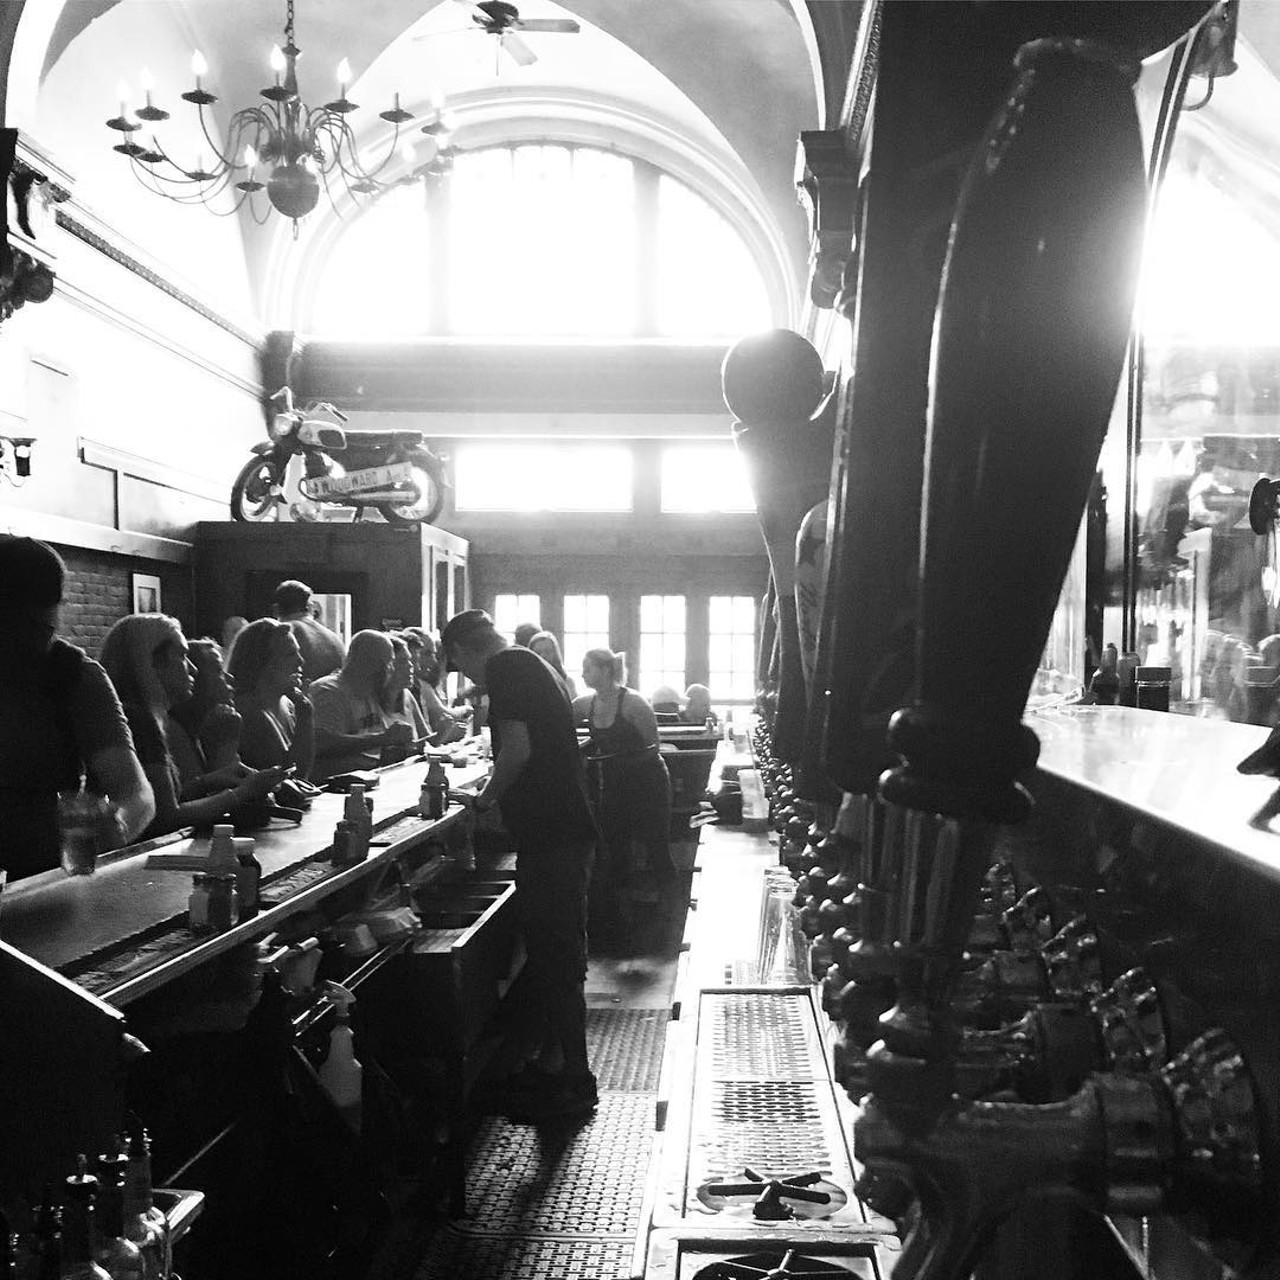 Grand Trunk Pub
A historic, high-ceilinged room that used to be a railroad&#146;s ticketing office. The Grand Trunk crew manages to combine Detroit history, scrumptious sandwiches, and a killer beer list, and it&#146;s probably all enjoyed best at one of their popular weekend brunches.
612 Woodward Ave., Detroit; 313-961-3043; www.grandtrunk.pub
(Photo via Facebook)